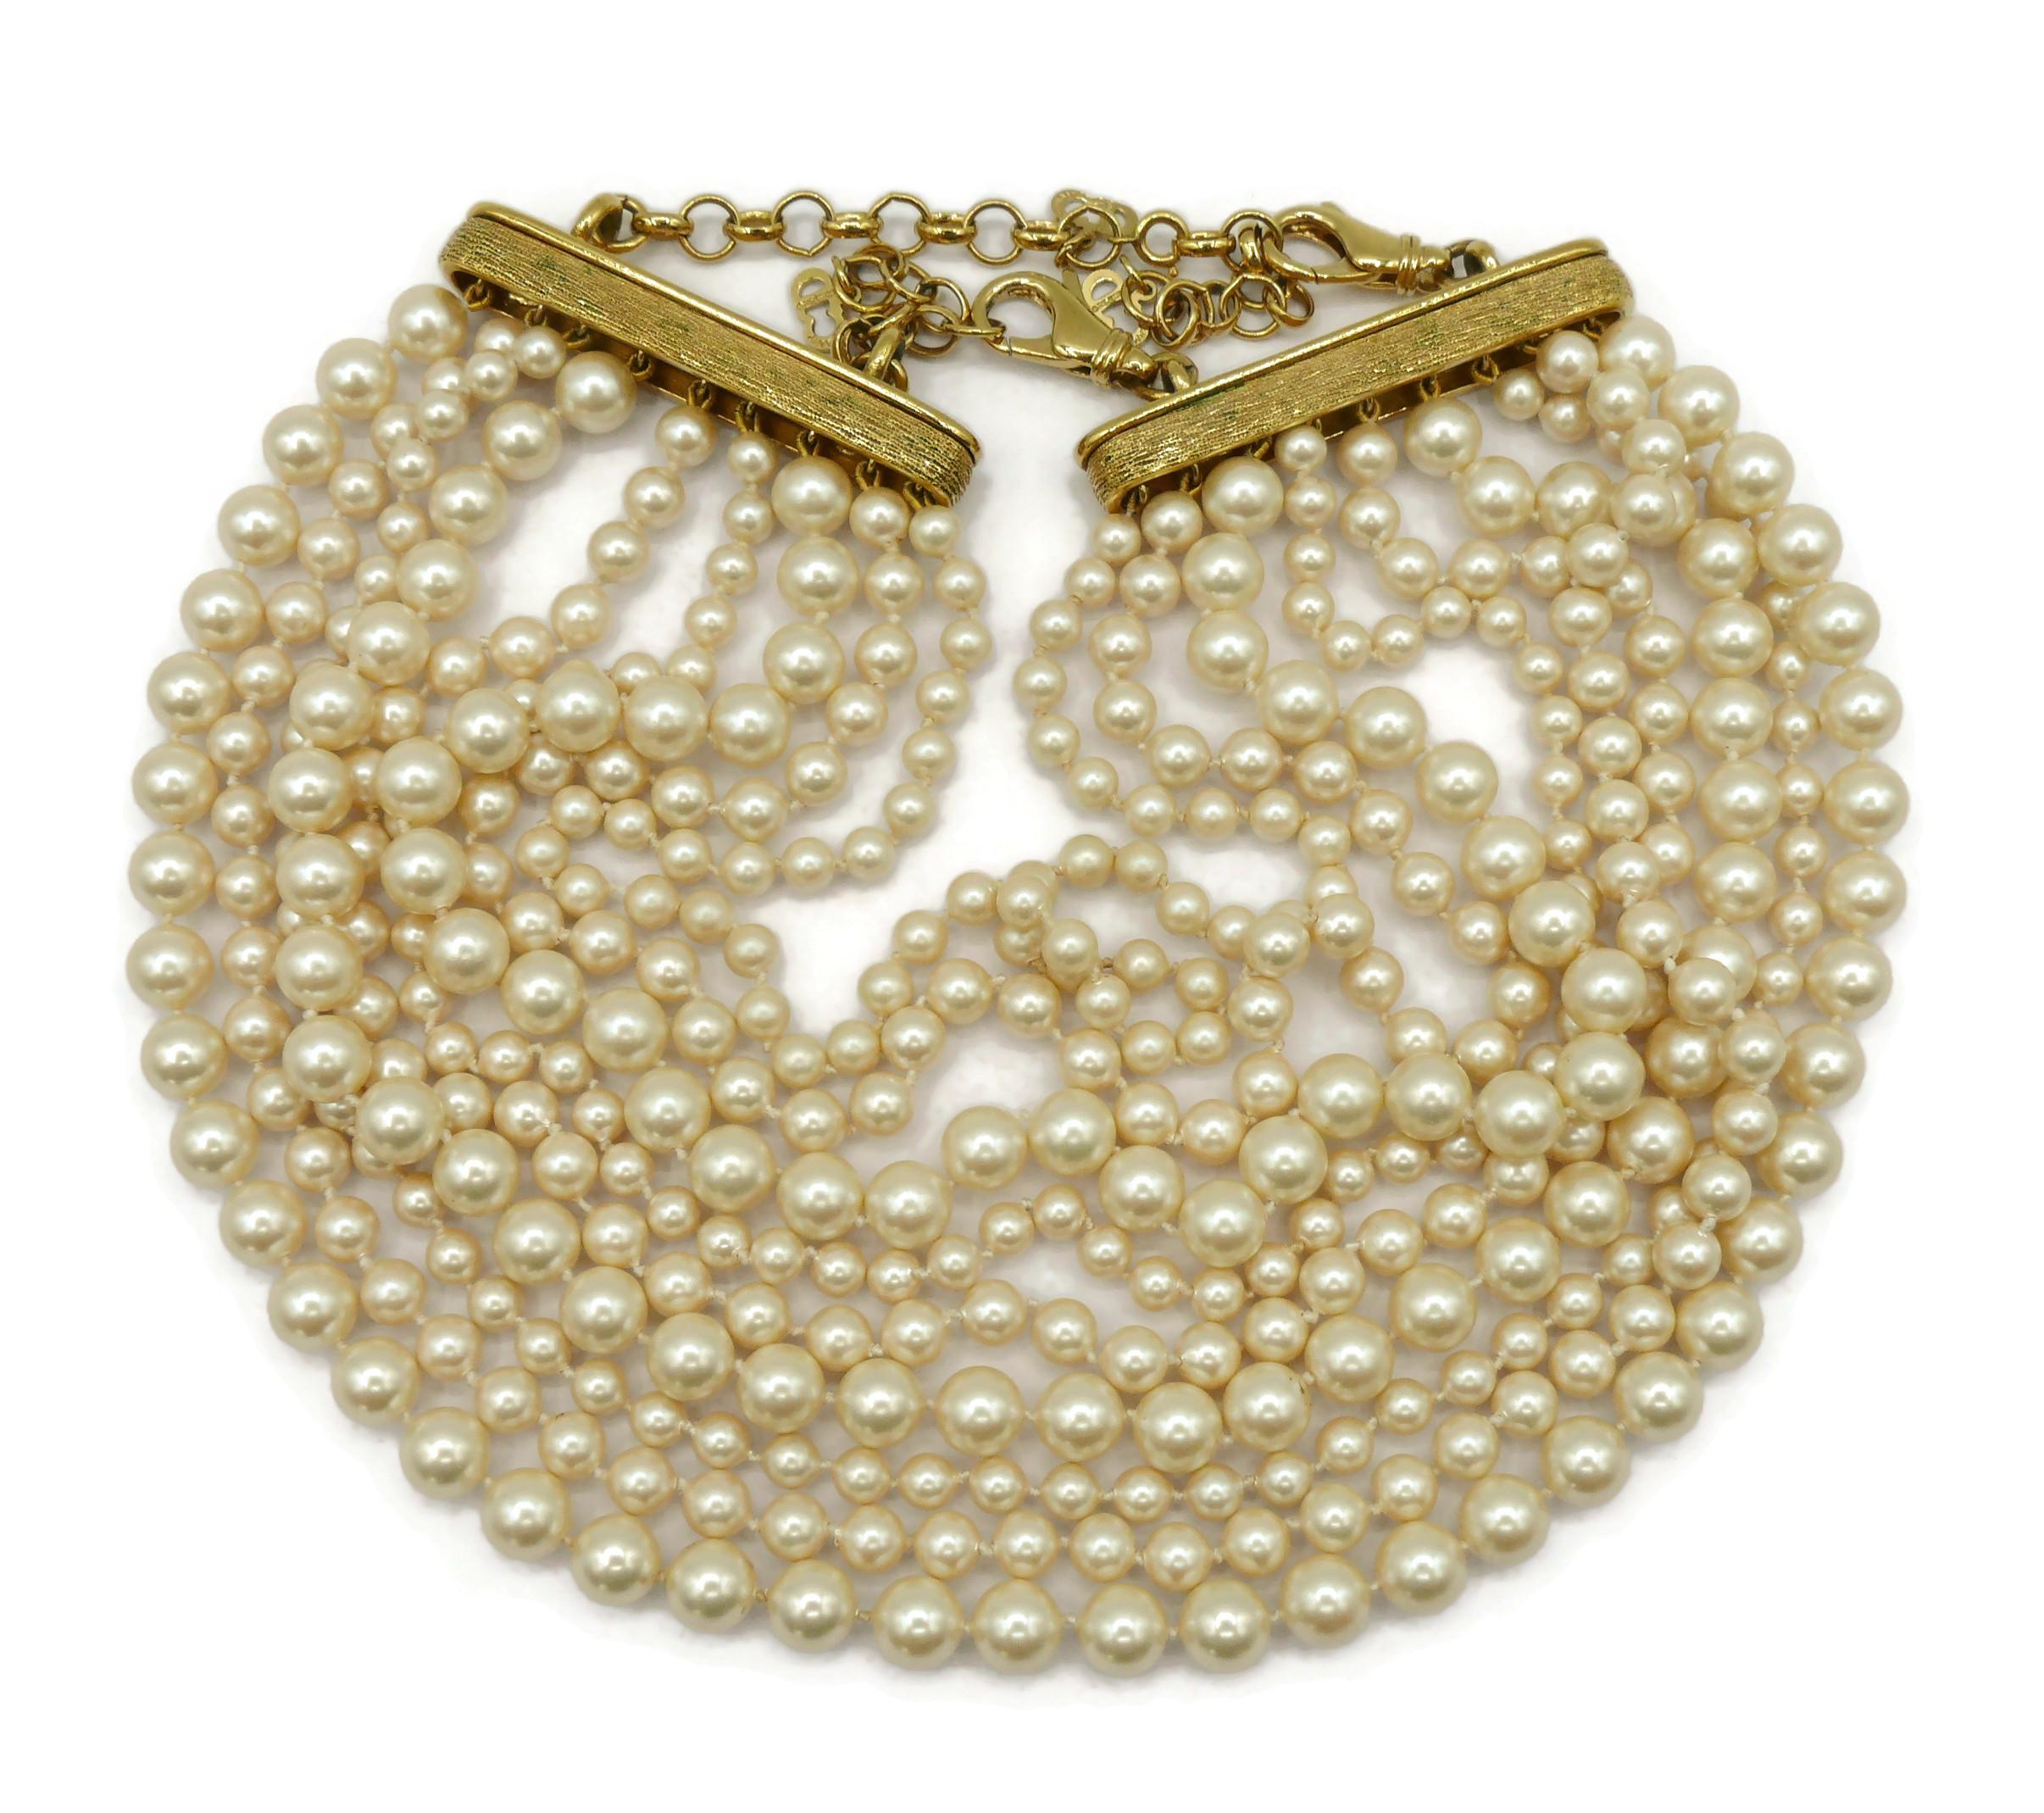 CHRISTIAN DIOR Vintage Multi-Strand Faux Pearl Necklace In Good Condition For Sale In Nice, FR